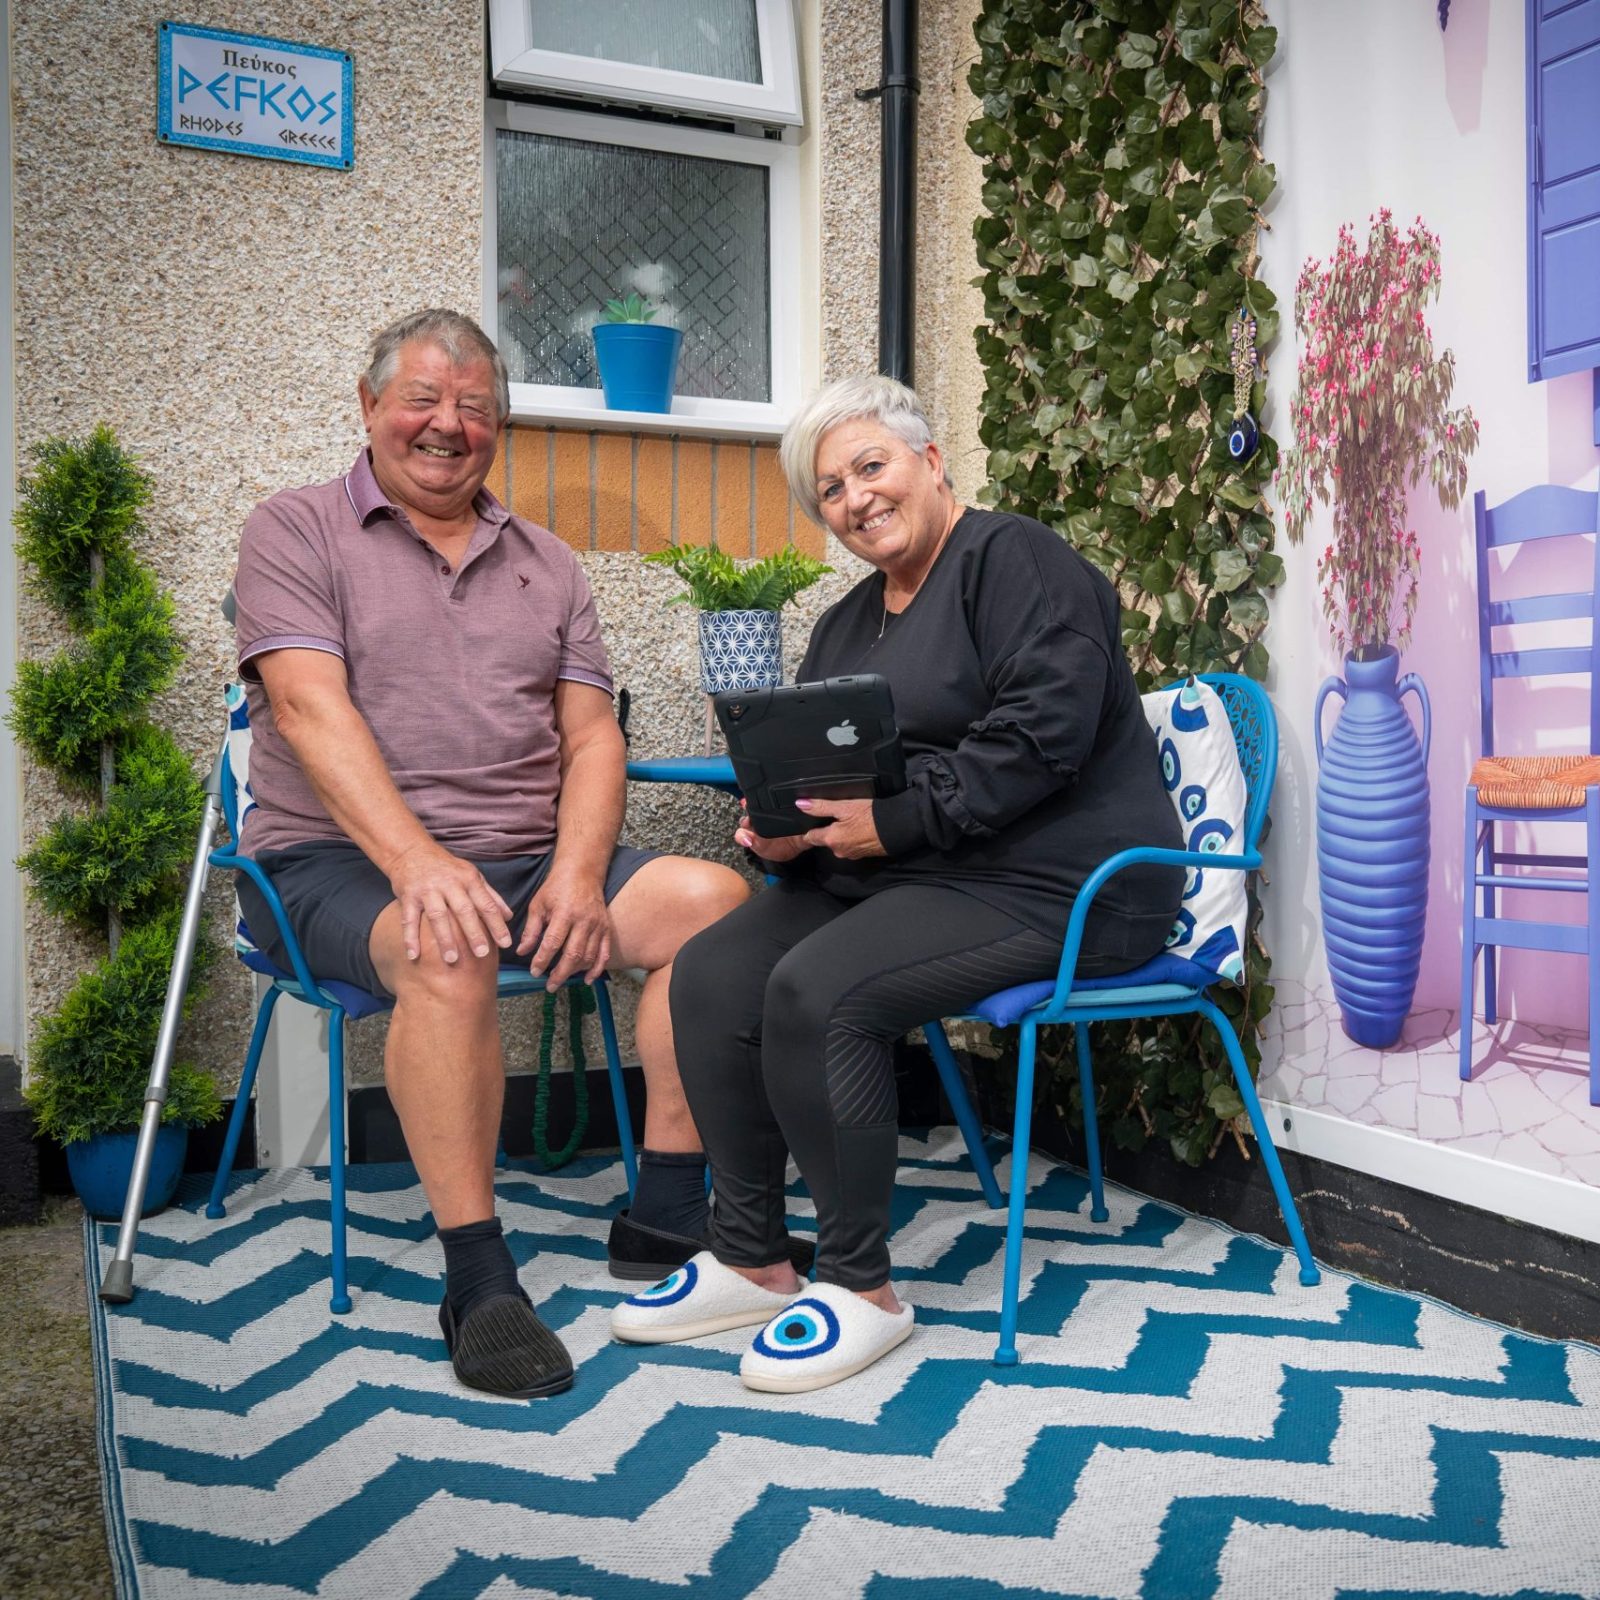 Trivallis Housing Landlord Wales A man and a woman sit outside a house with a decorative facade featuring a painted scene of a cafe, complete with a statue and a patterned rug, part of Trivallis' RCT housing